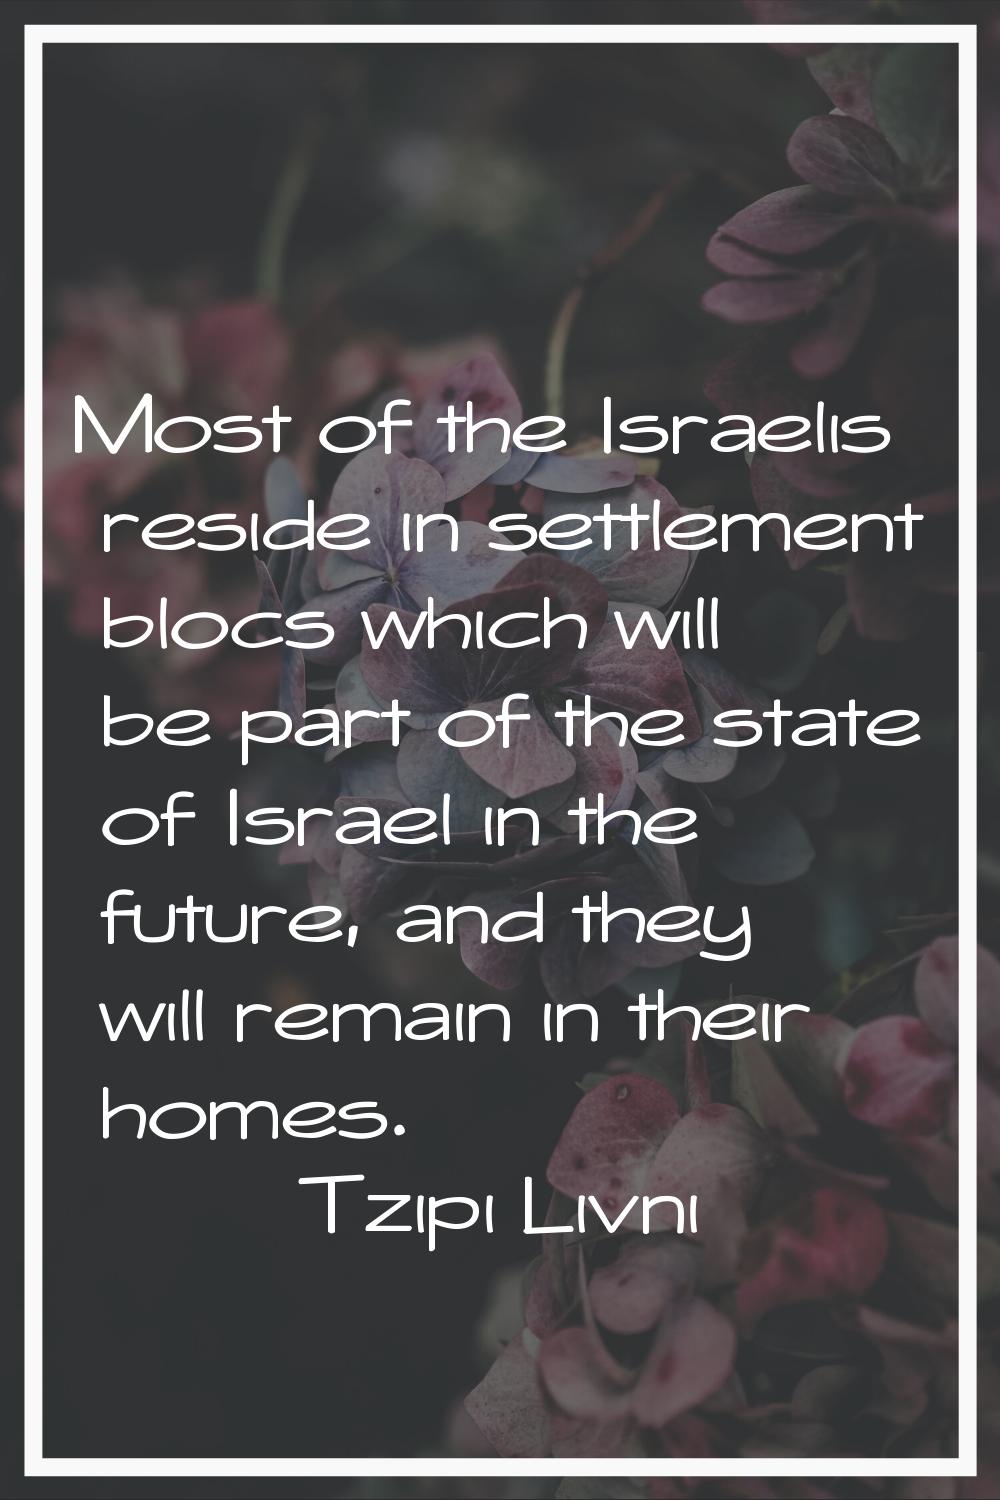 Most of the Israelis reside in settlement blocs which will be part of the state of Israel in the fu